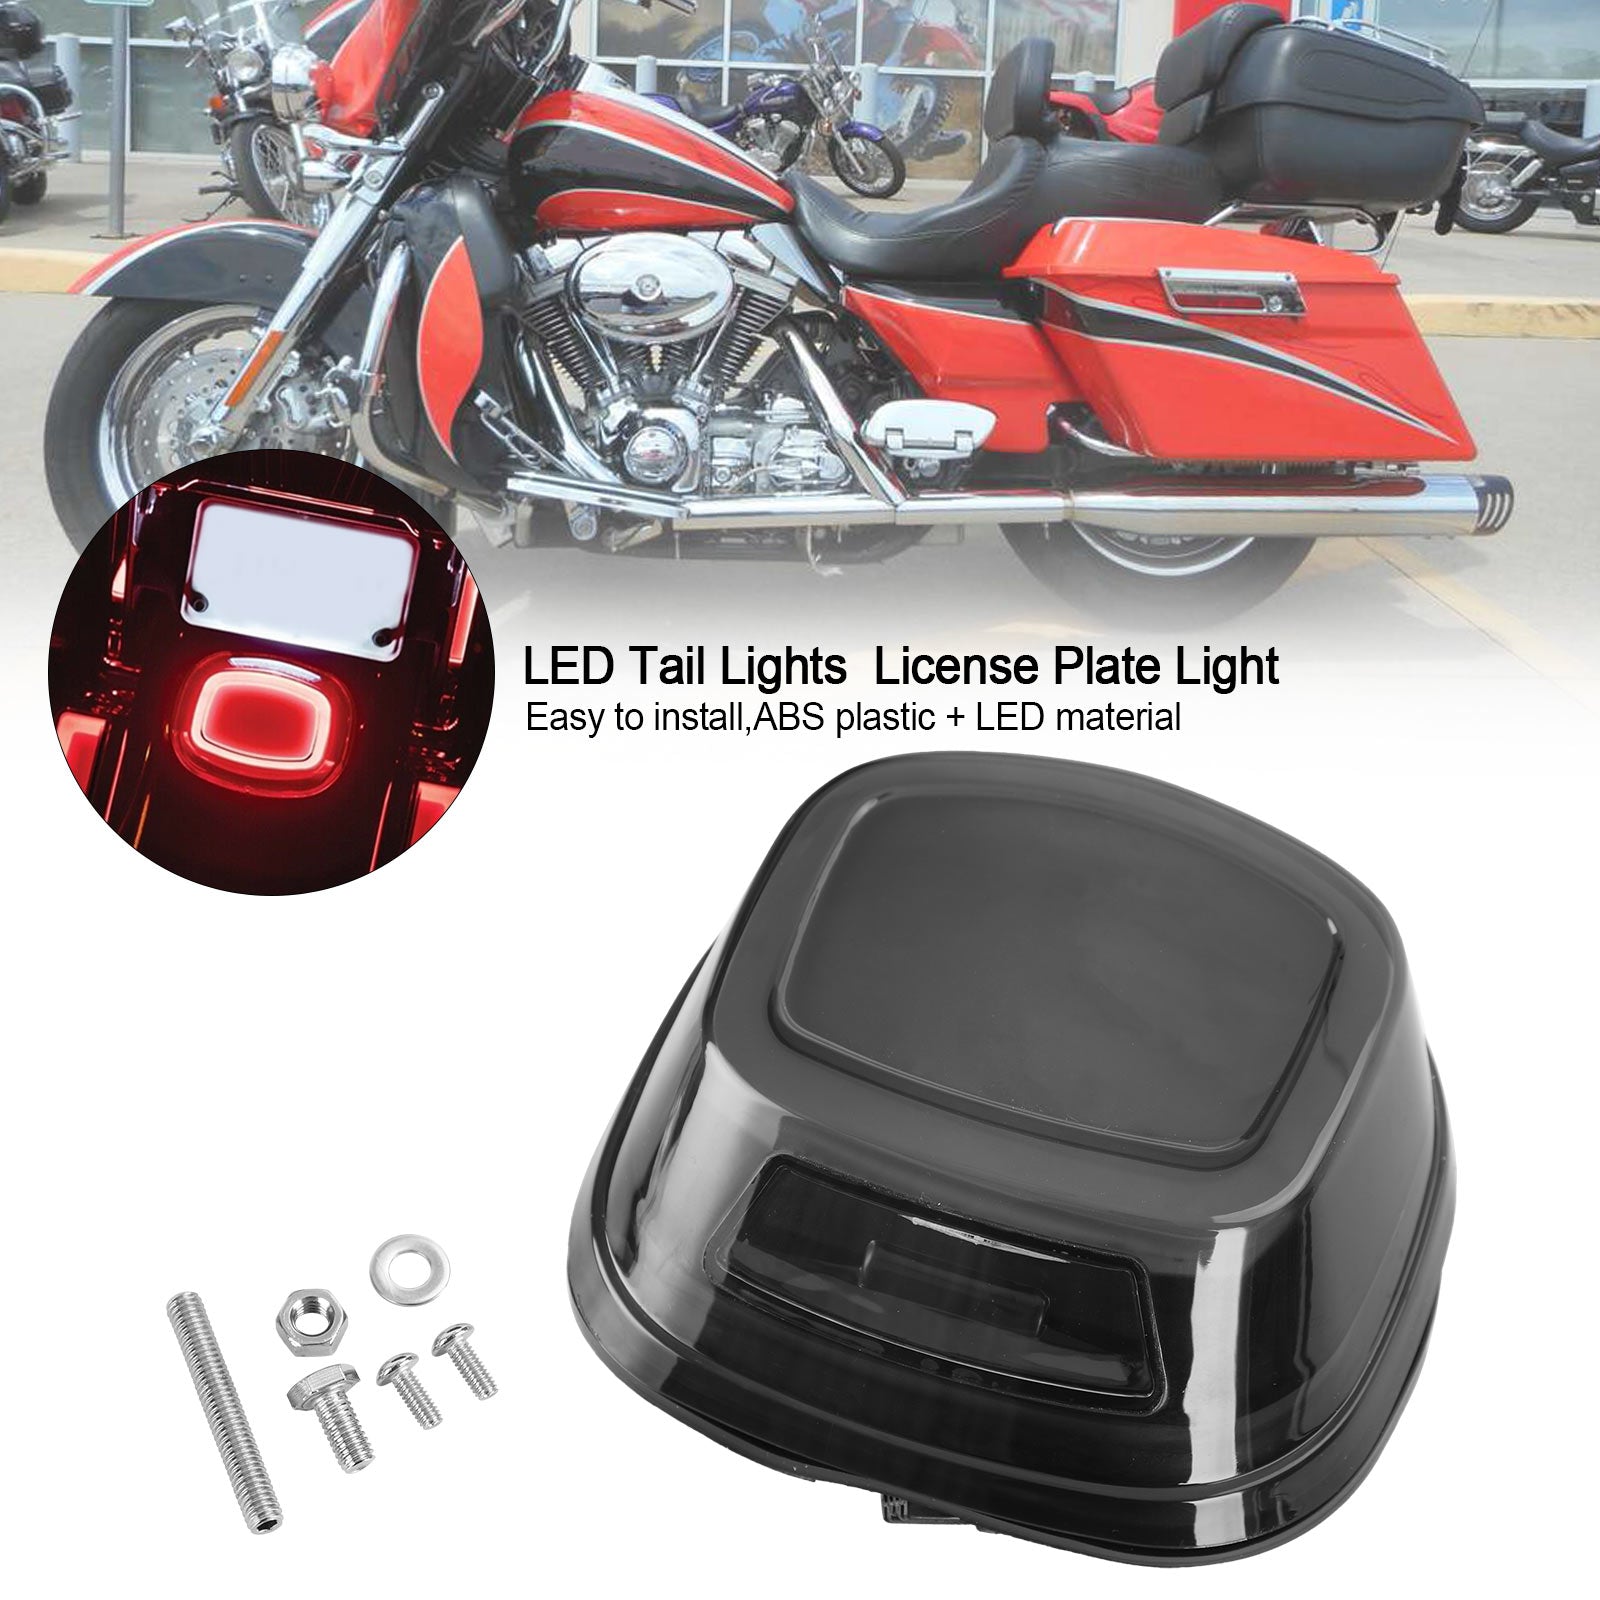 Fanali posteriori a LED Luce targa per Touring Softail Dyna Sportster 99-Up generico